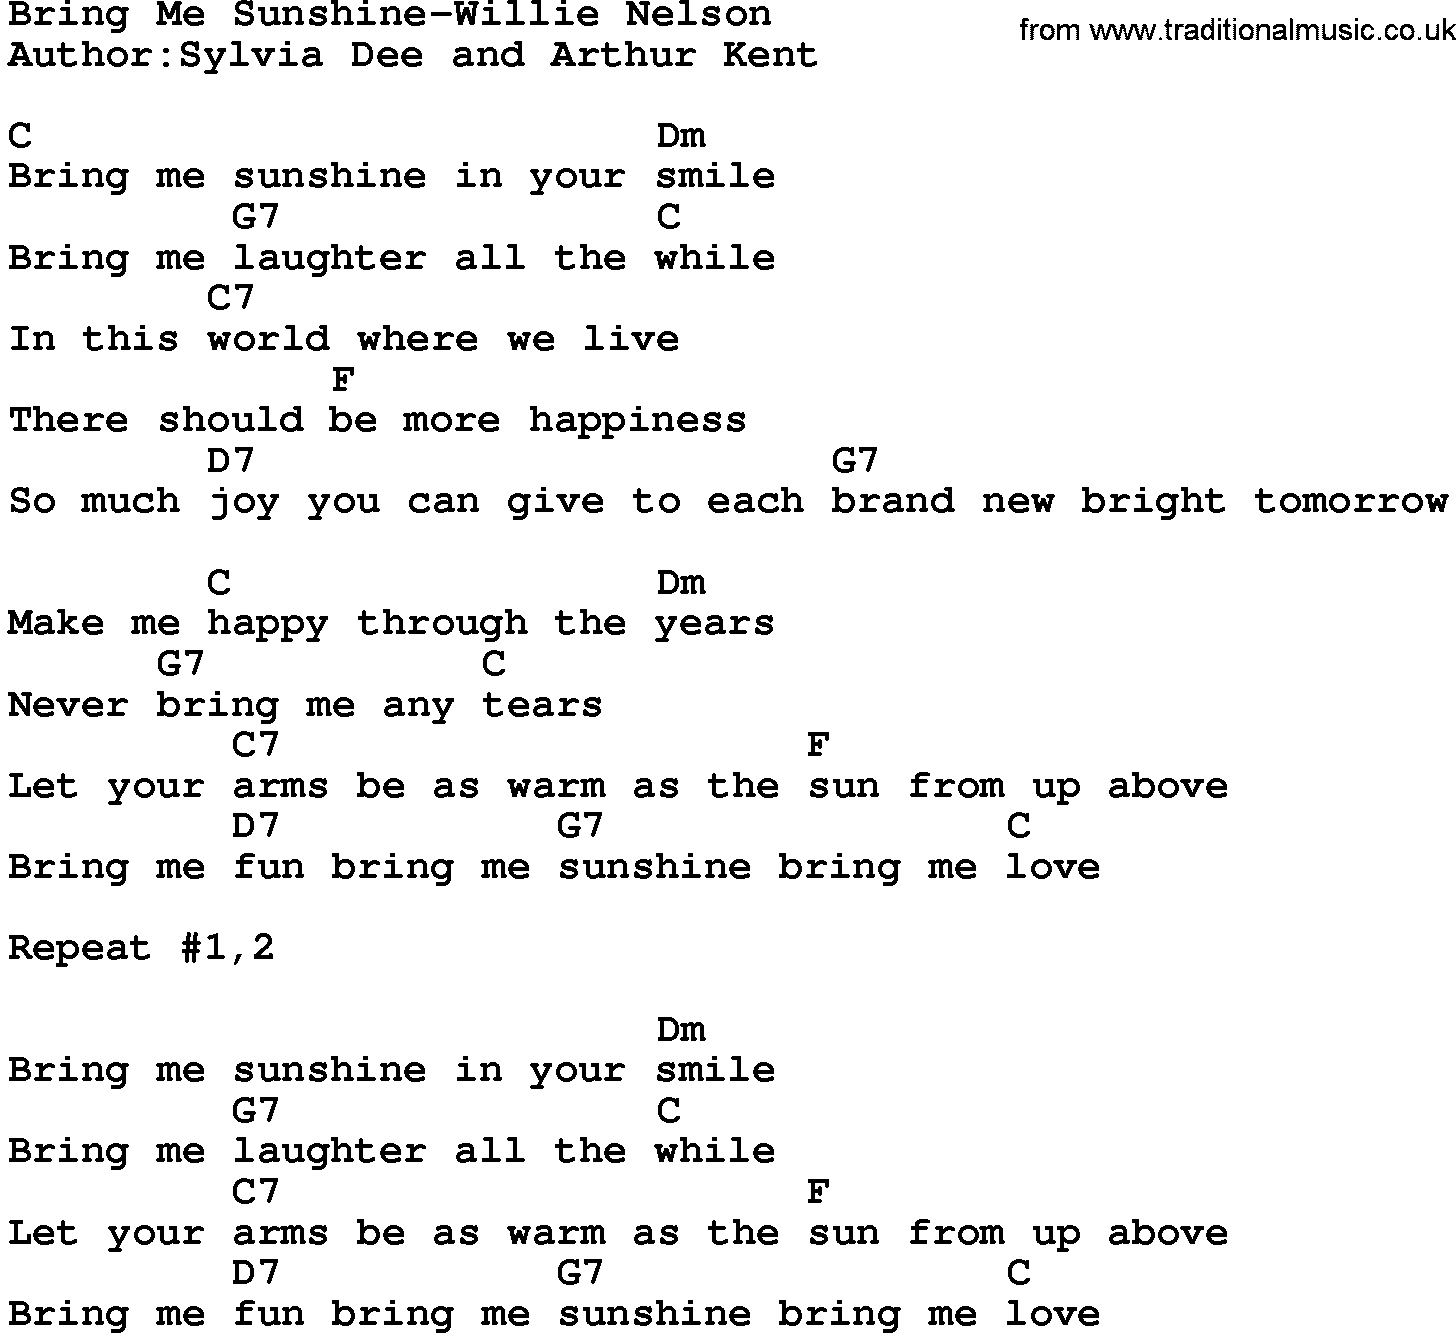 Country music song: Bring Me Sunshine-Willie Nelson lyrics and chords